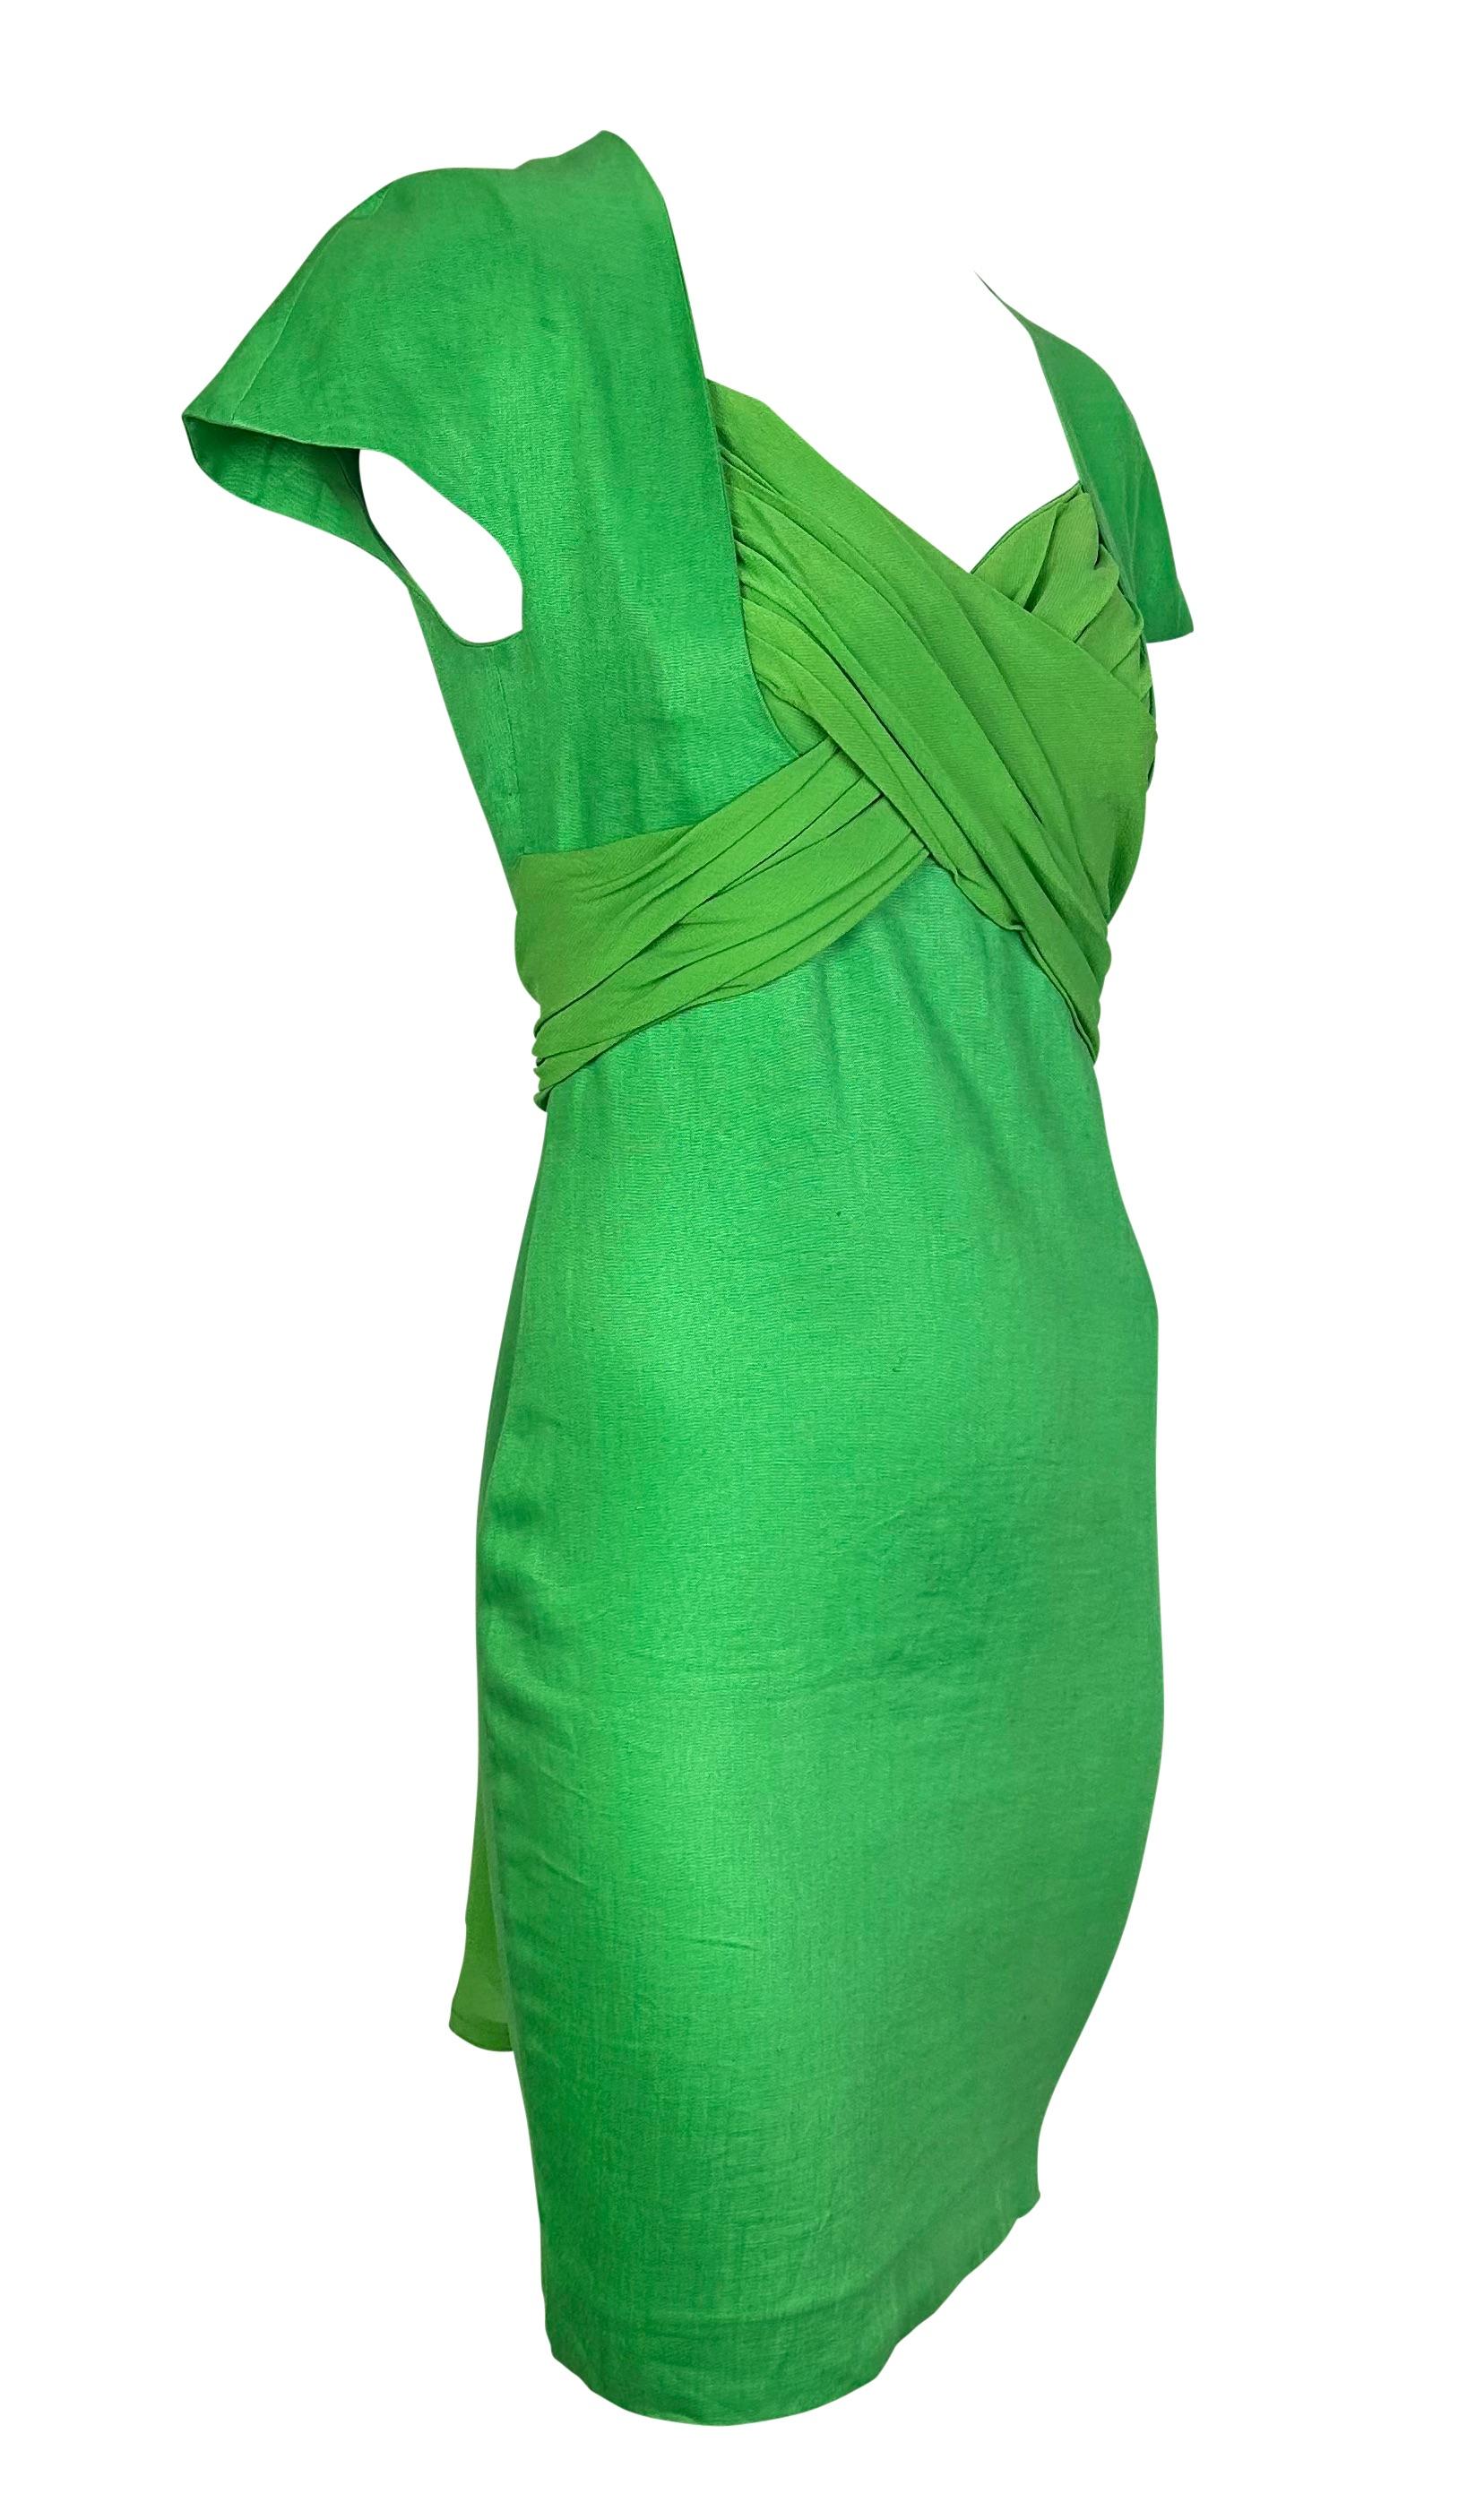 S/S 1989 Gianni Versace Runway Bright Green Linen Chiffon Tie Runway Dress In Good Condition For Sale In West Hollywood, CA